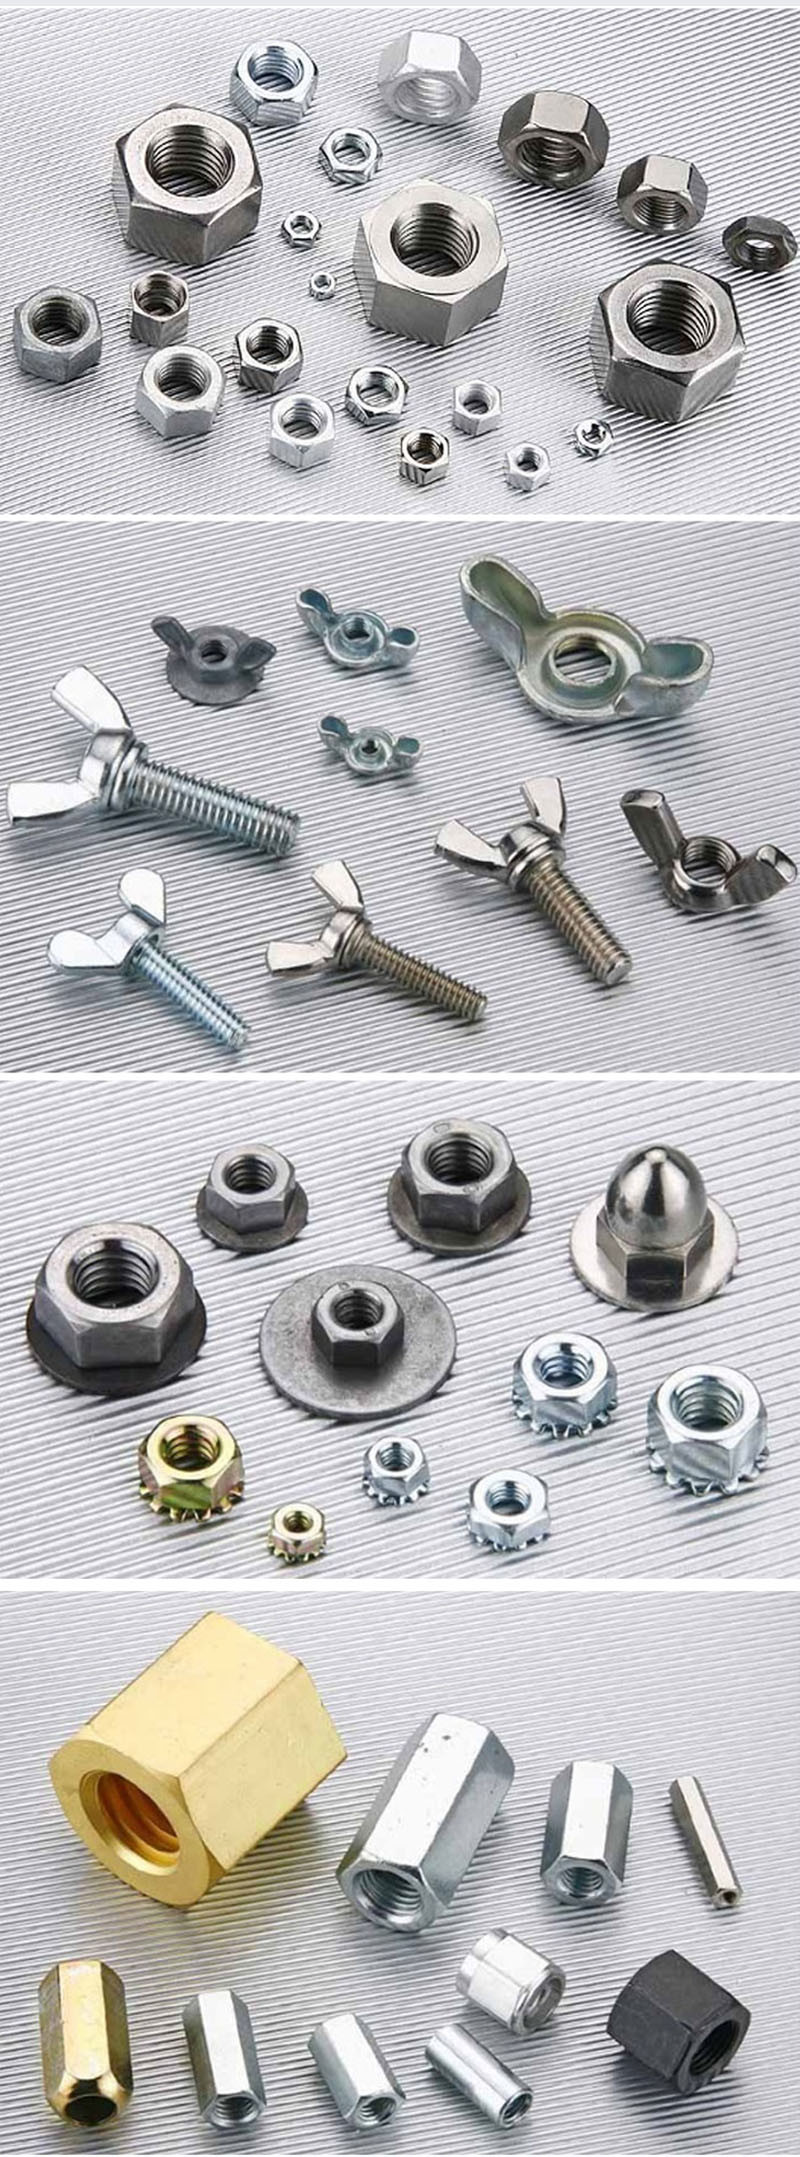 Stainless Steel Scotted Button Cap Machine Screw